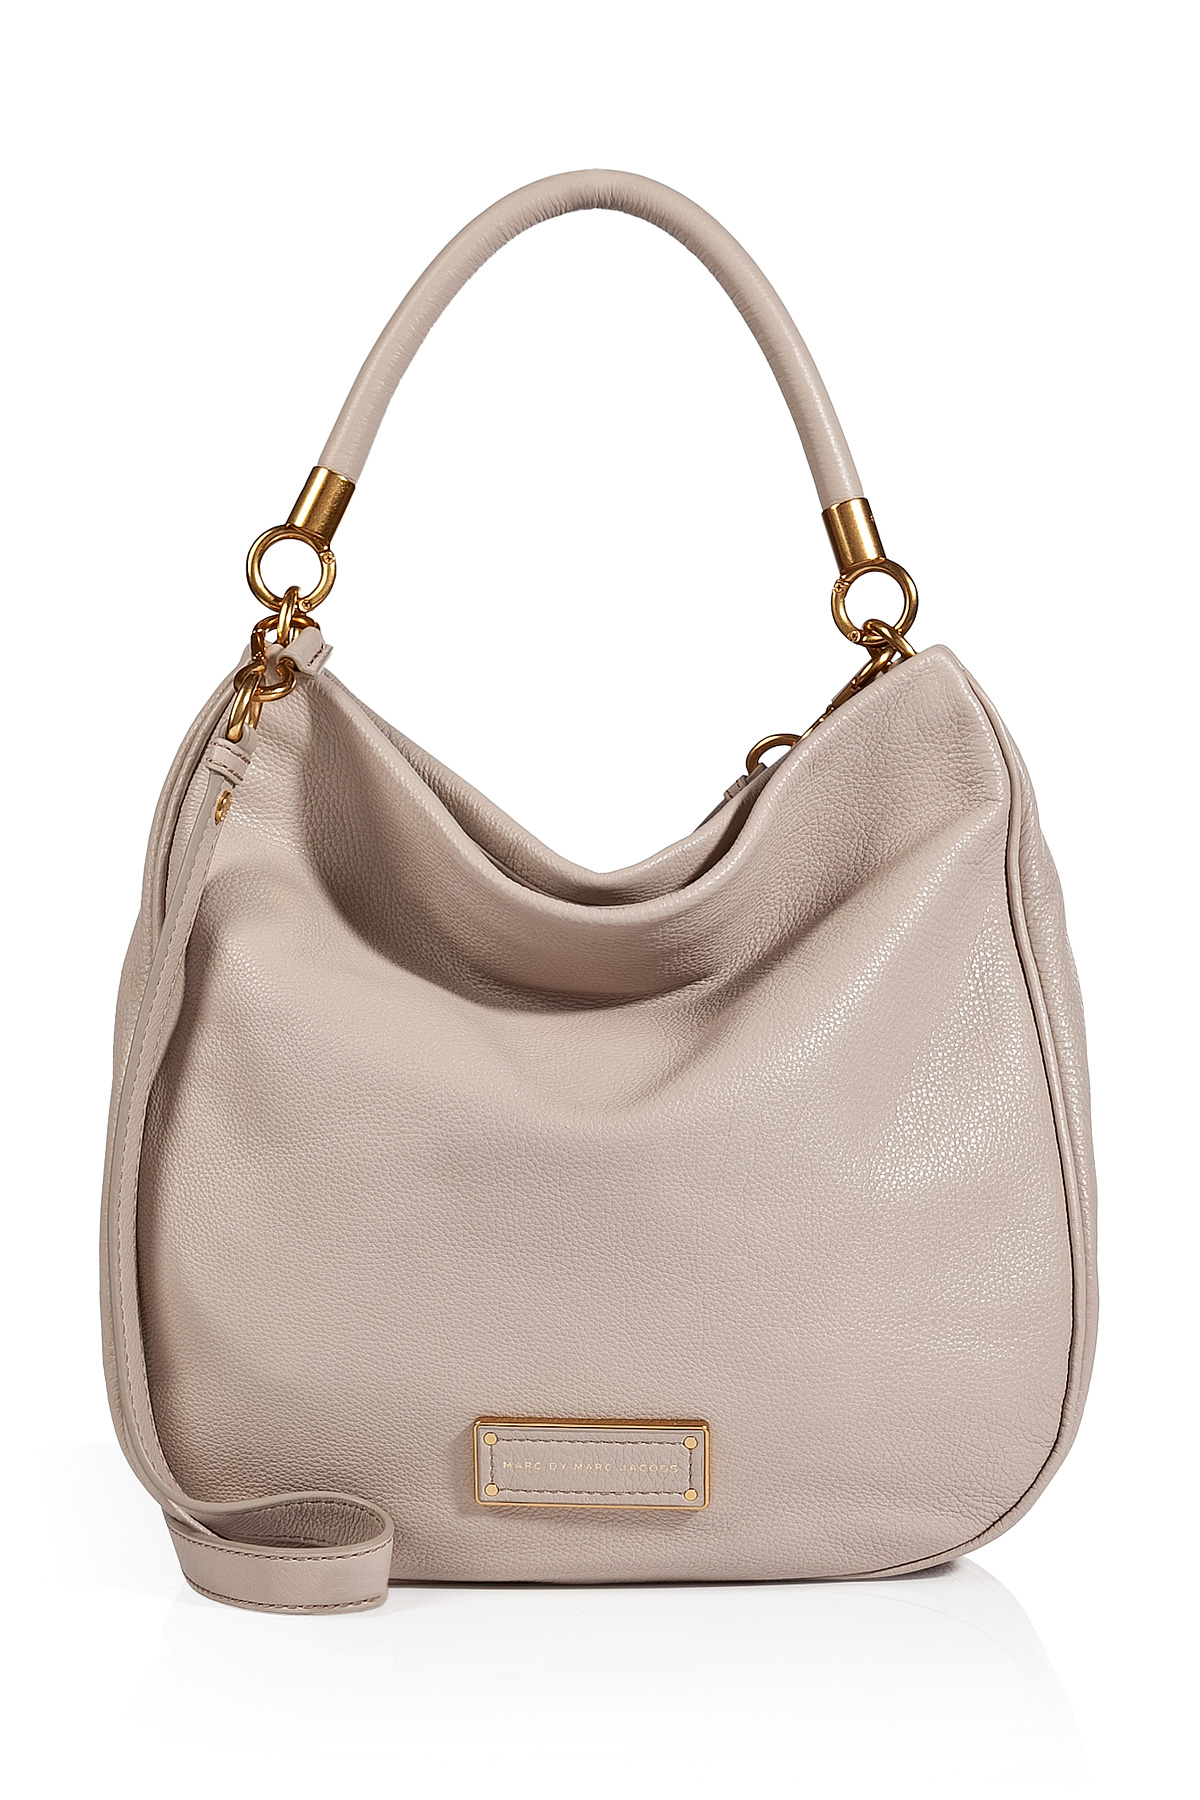 Marc By Marc Jacobs Leather Hobo Bag in Natural - Lyst